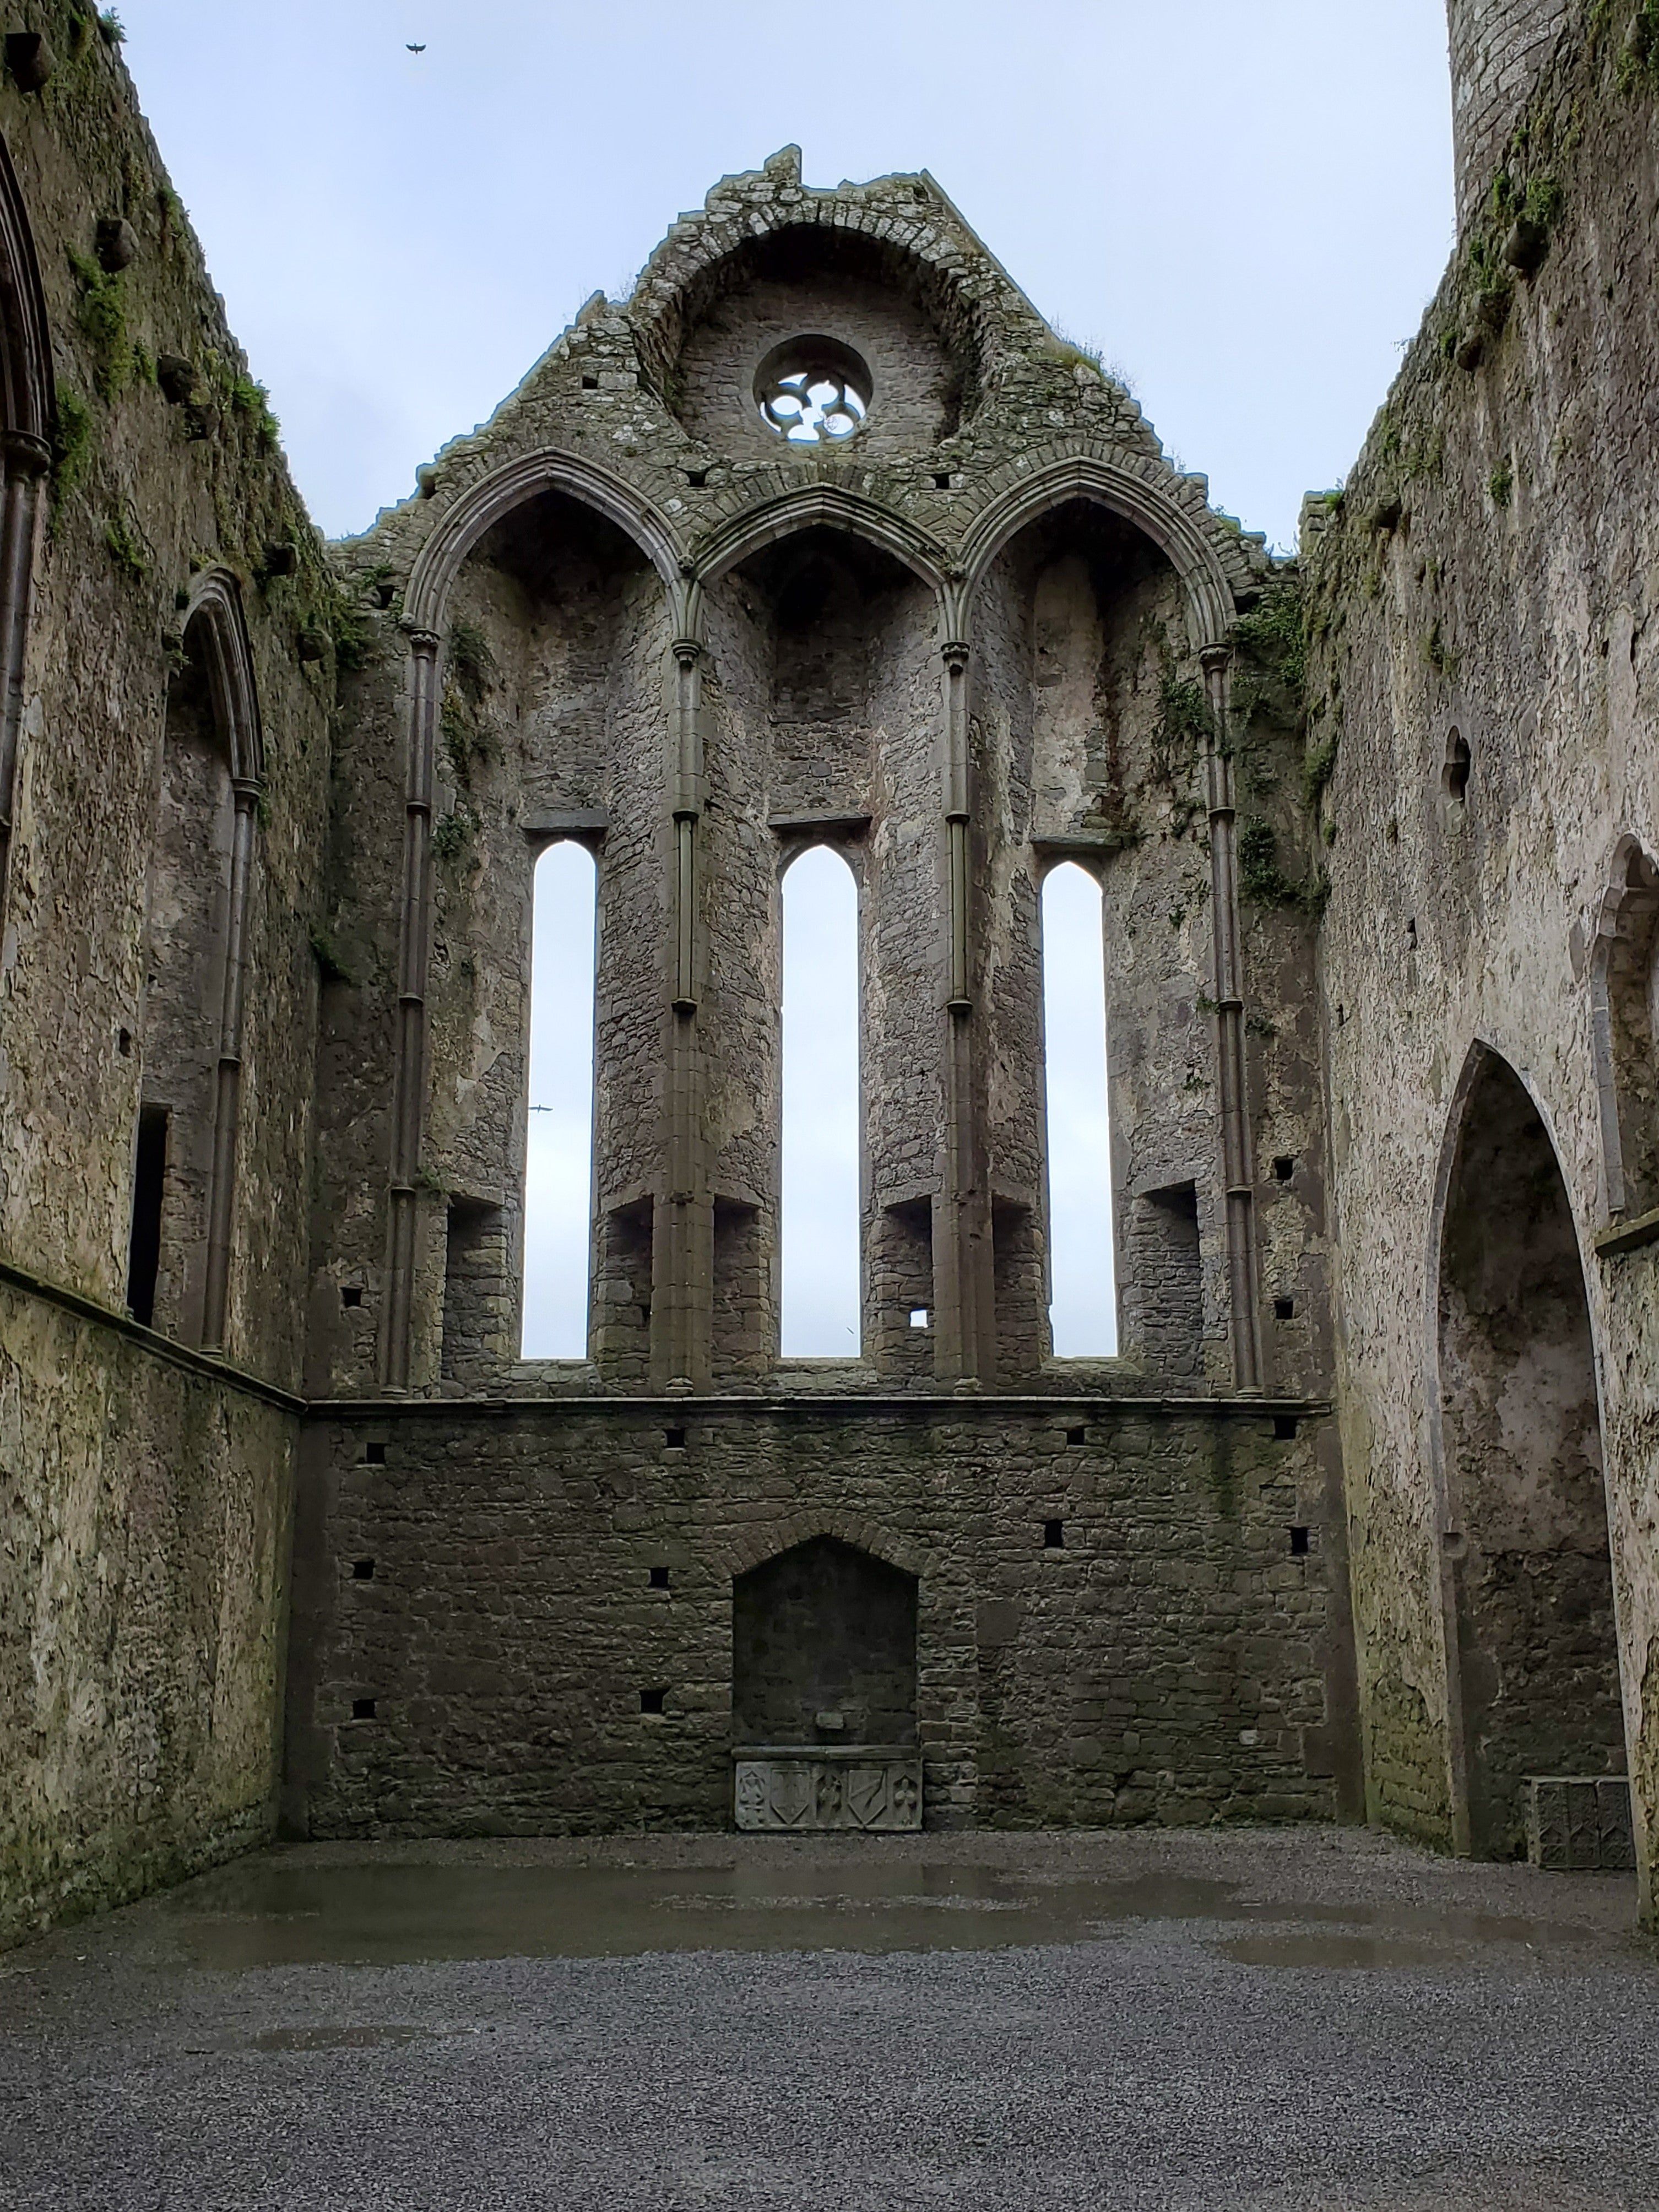 Picture of ruins of cathedral at the Rock of Cashel in Ireland, for historical consultation page, offering historical research and writing services, Photoshop services, and more.